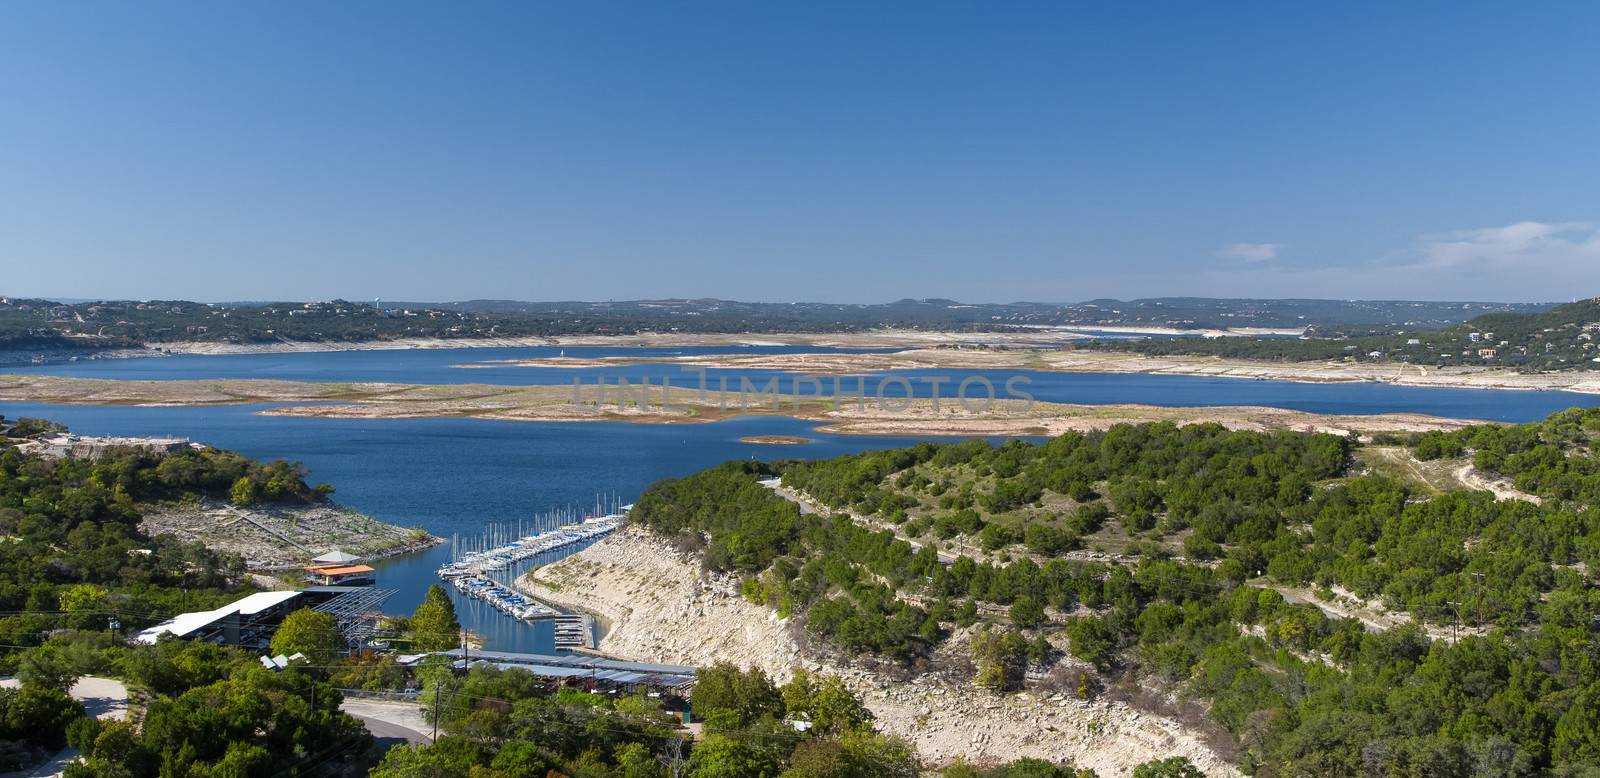 Panoramic View of drying Lake Travis, a reservoir on the Colorado River in central Texas in the United States